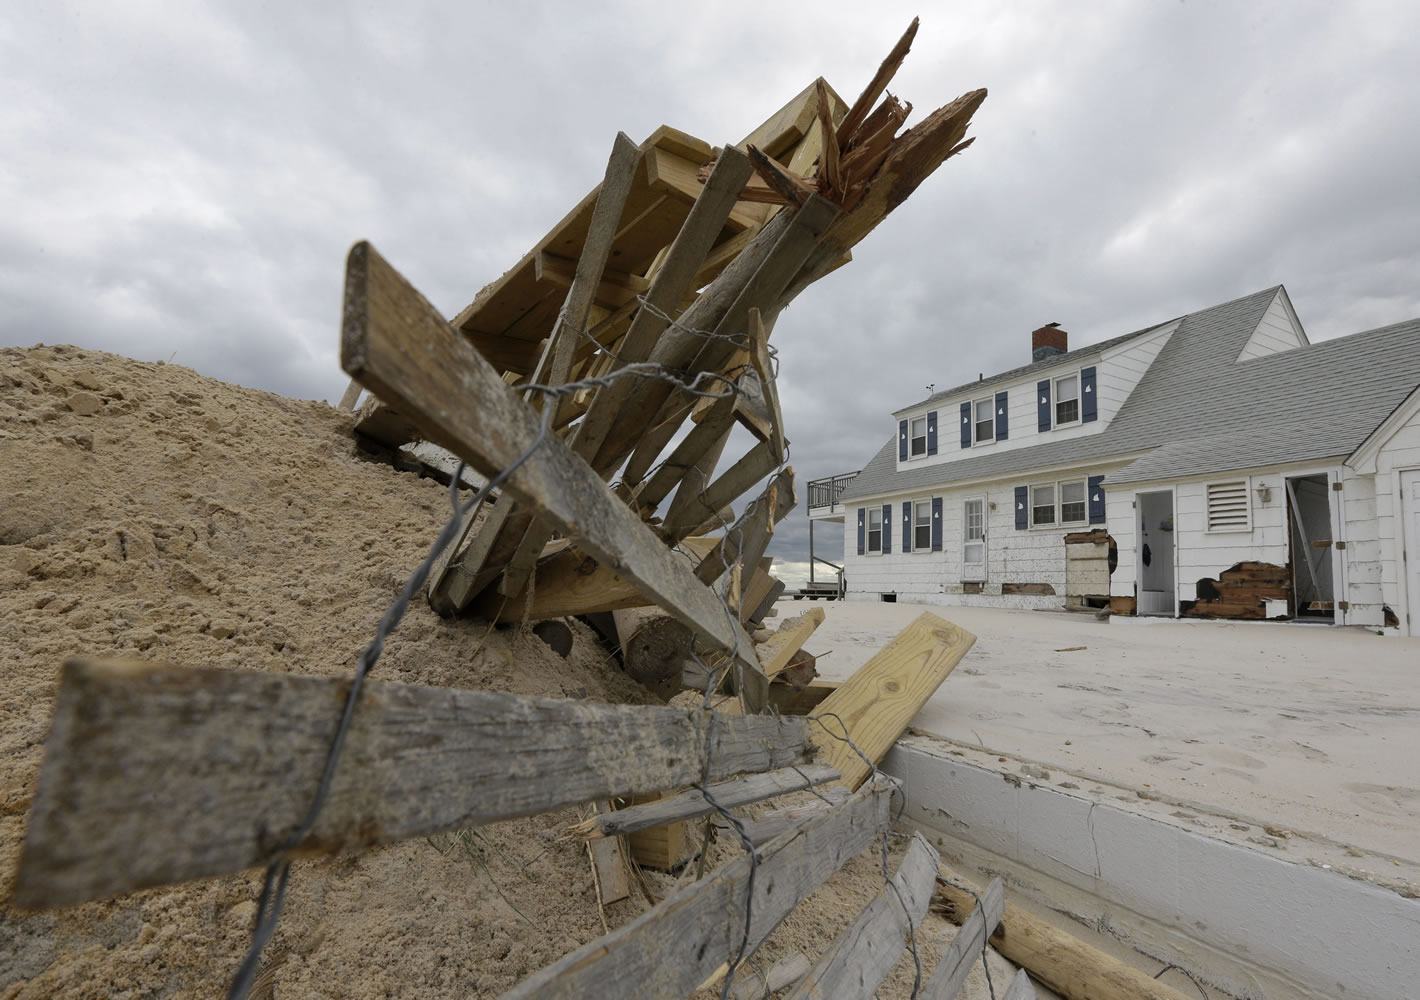 Associated Press files
This Nov. 1, 2012 file photo shows a pile of sand and debris following superstorm Sandy in Brant Beach, N.J. A new psychology study shows that people are wrongly less prone to flee from hurricanes with feminine names.